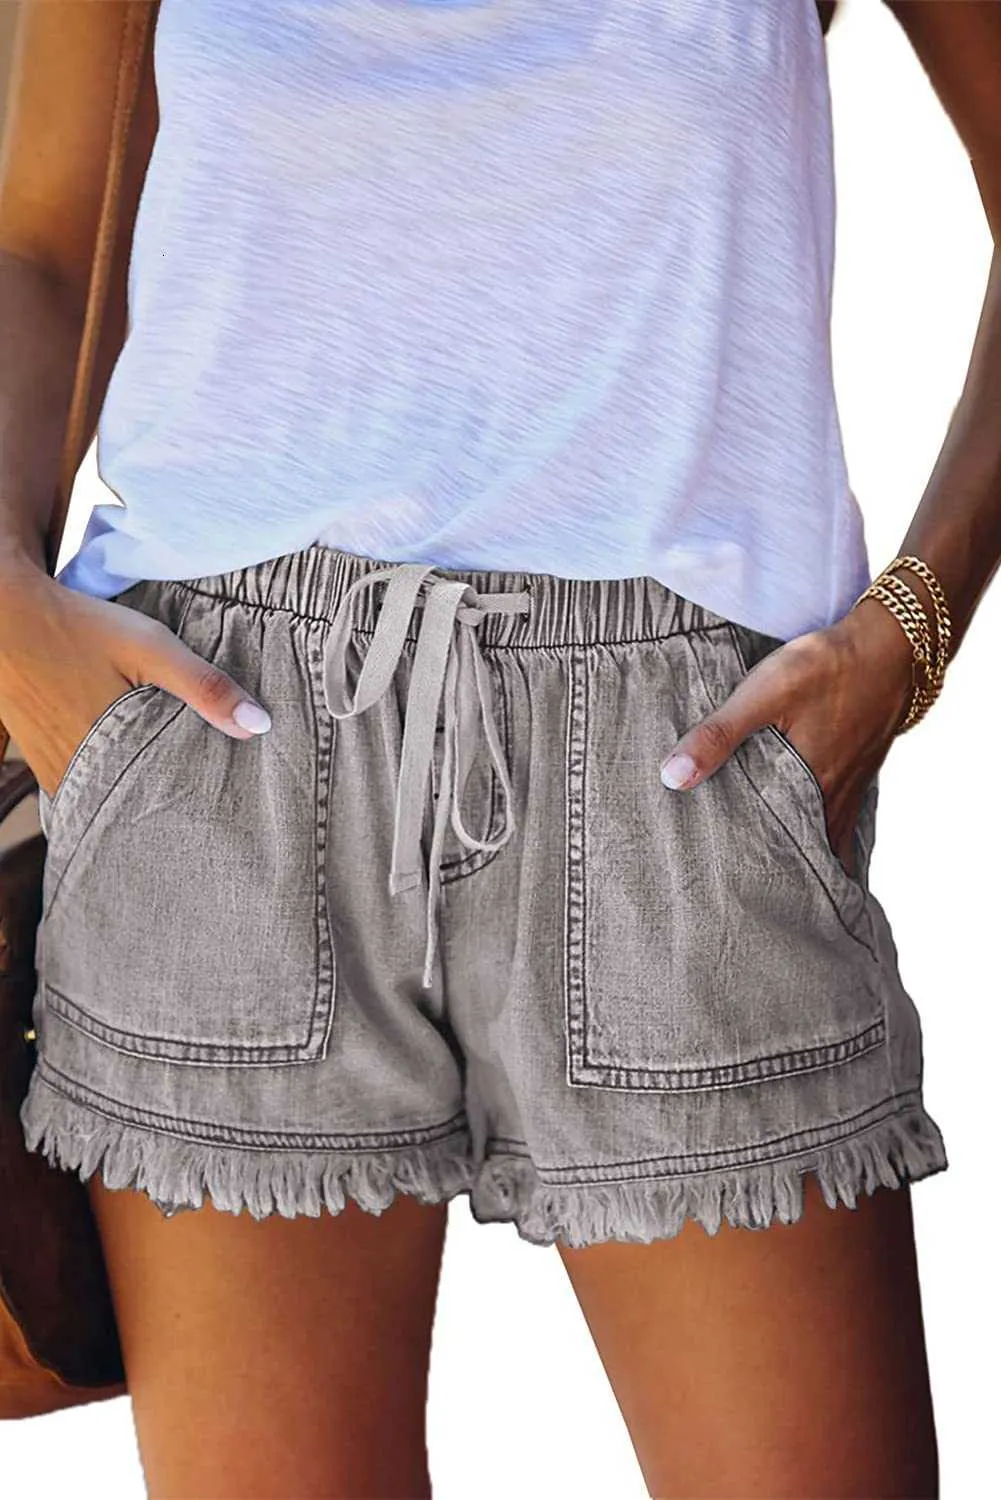 Vente en gros Summer Brand Shorts pour femmes Jupe courte Sports Running Fitness Séchage rapide Goldpkf Womens Jean for Denim Casual Mid Waist Frayed Stretchy Ripped